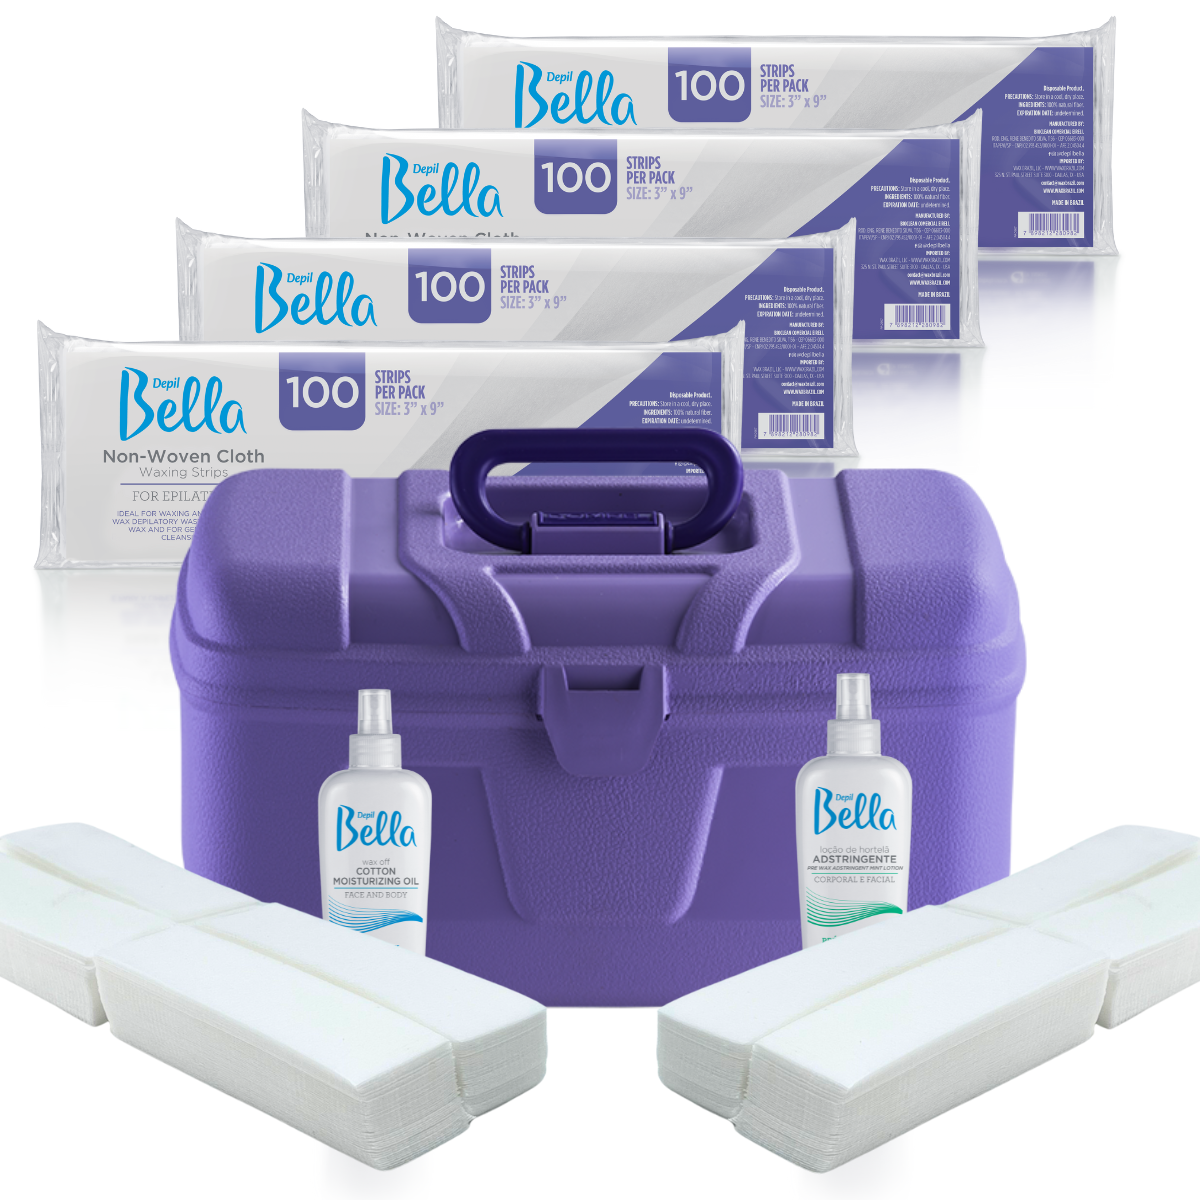 Depil Bella Bundle - 4 Non-Woven Cloths, 400 Eyebrow Wax Strips, Pre-Wax Astringent, Wax-Off Moisturizing Oil, and Purple Plastic Case - Buy professional cosmetics dedicated to hair removal